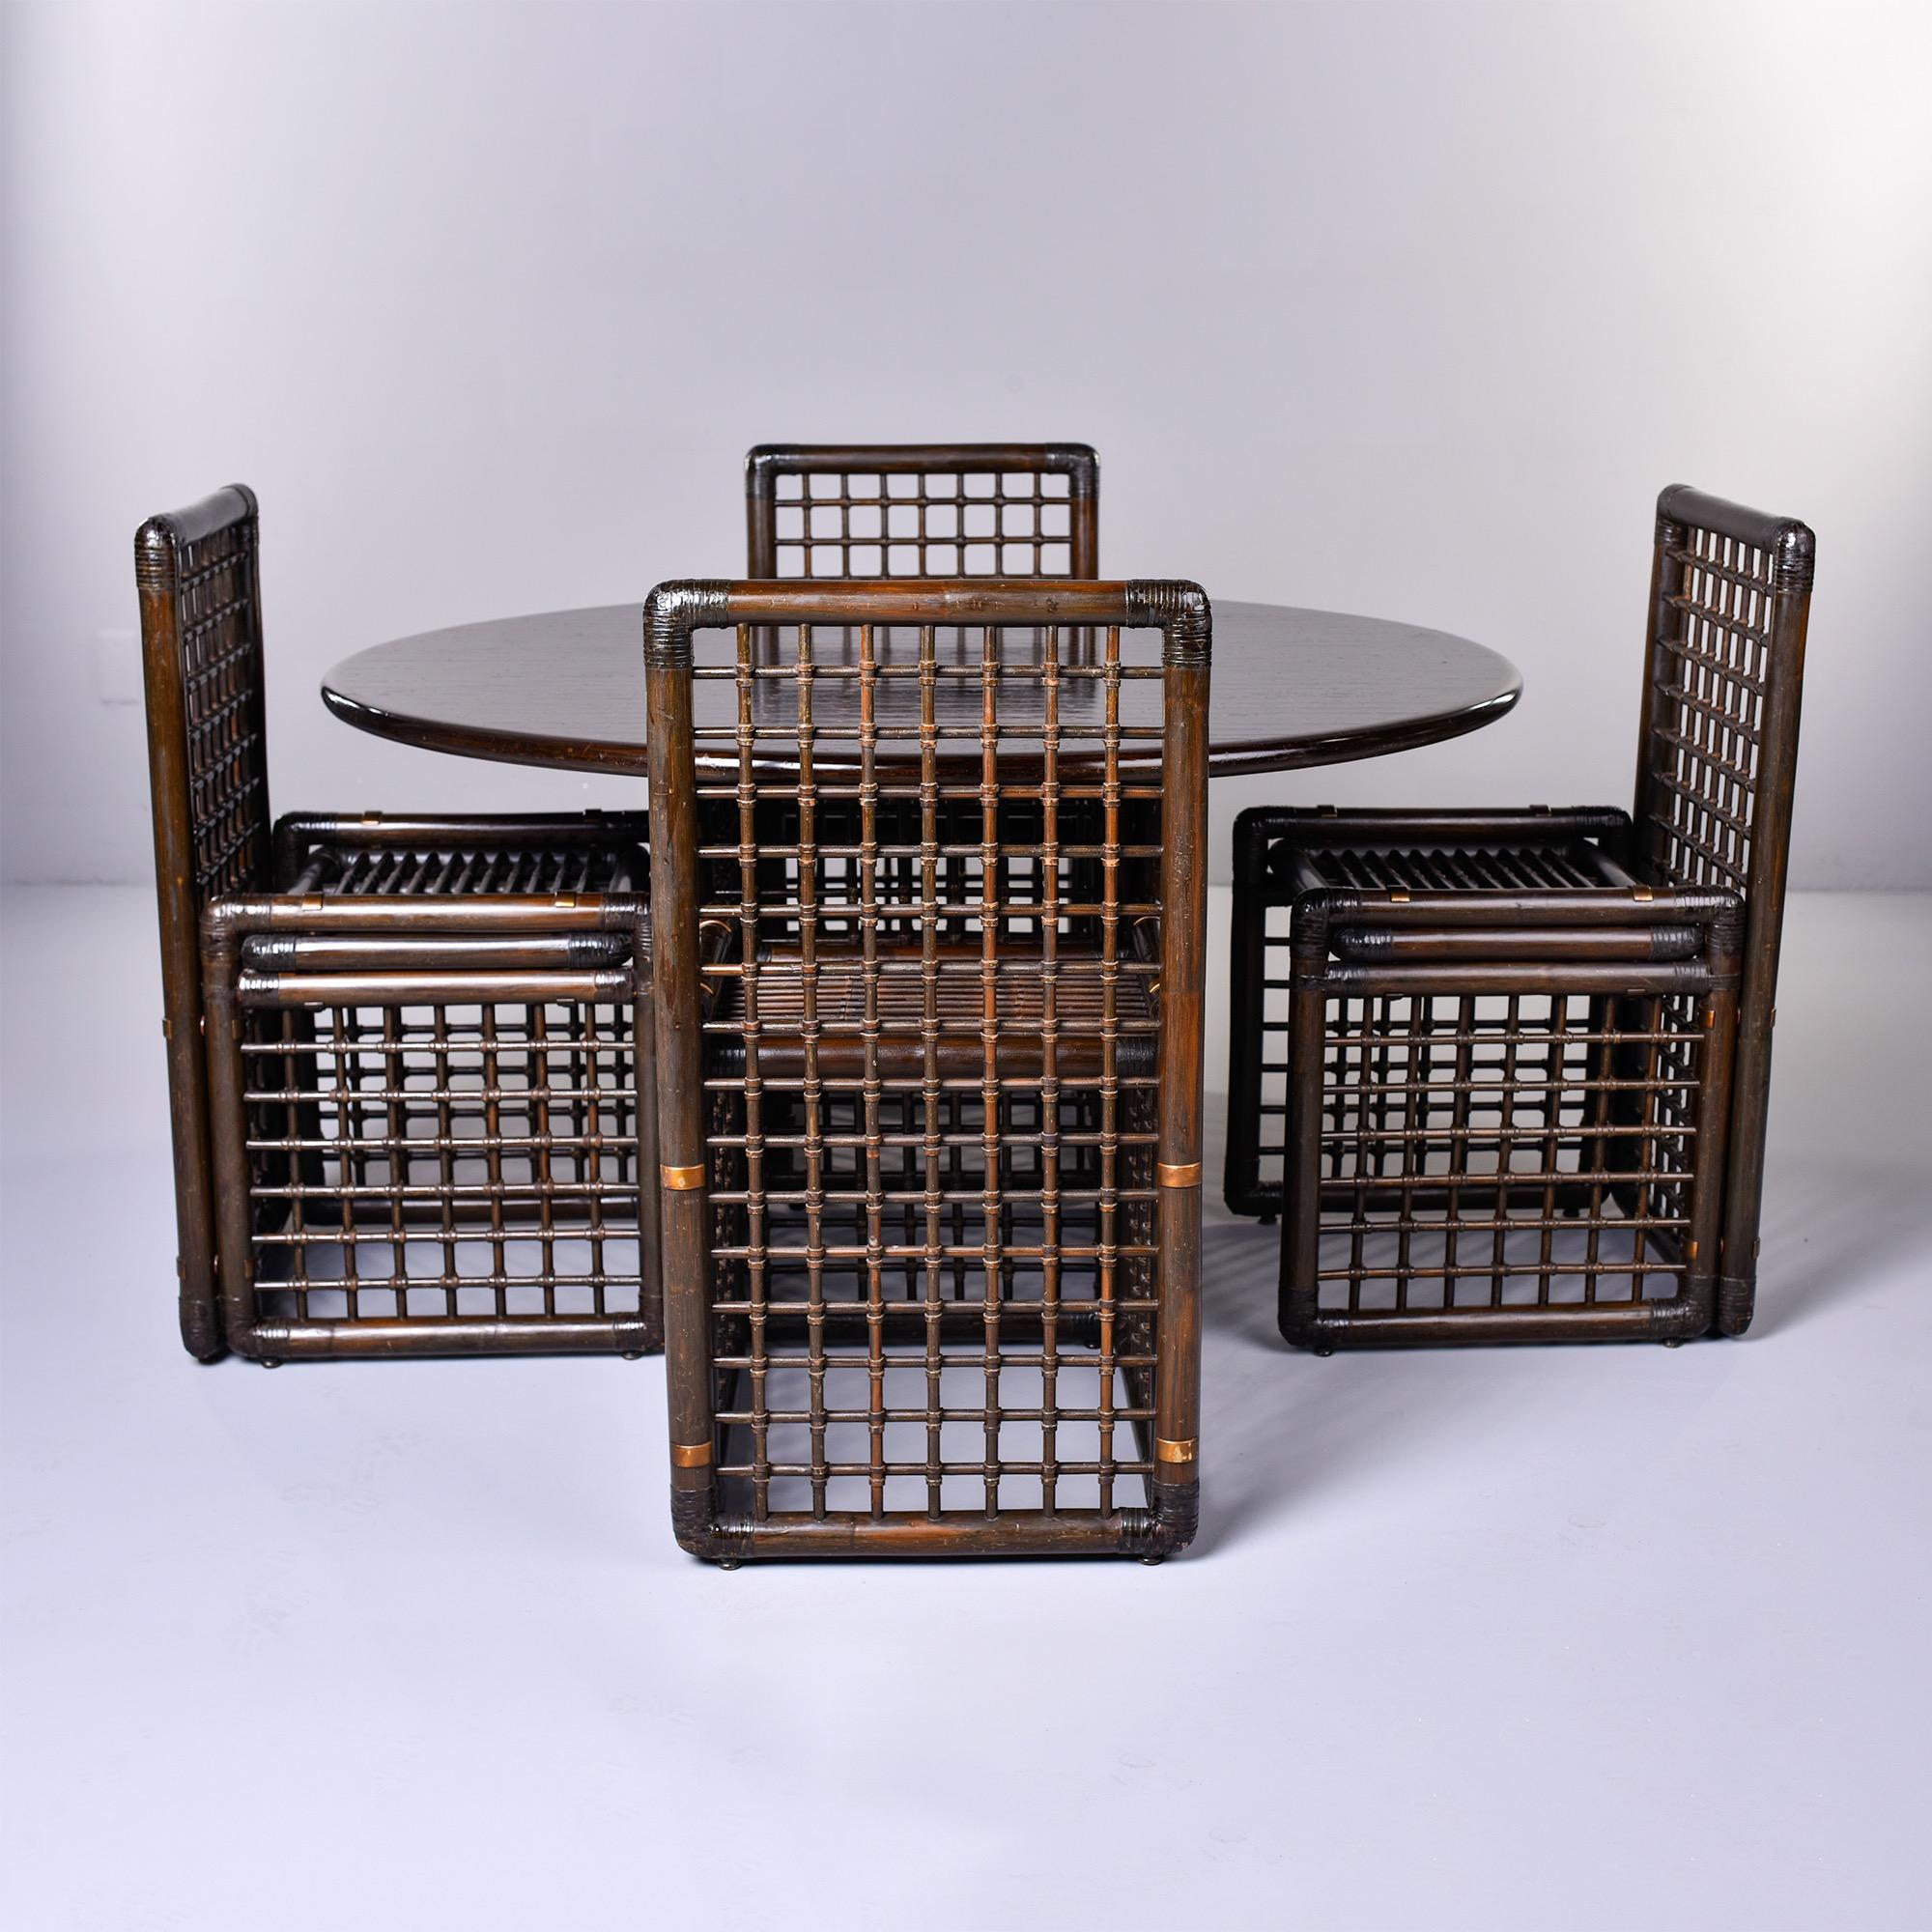 This circa 1970s five piece dining set from the Basilan series consists of four chairs and a round table designed by renowned husband and wife team Tobia and Afra Scarpa for B&B Italia. The chairs are made of rattan and malacca cane. Original